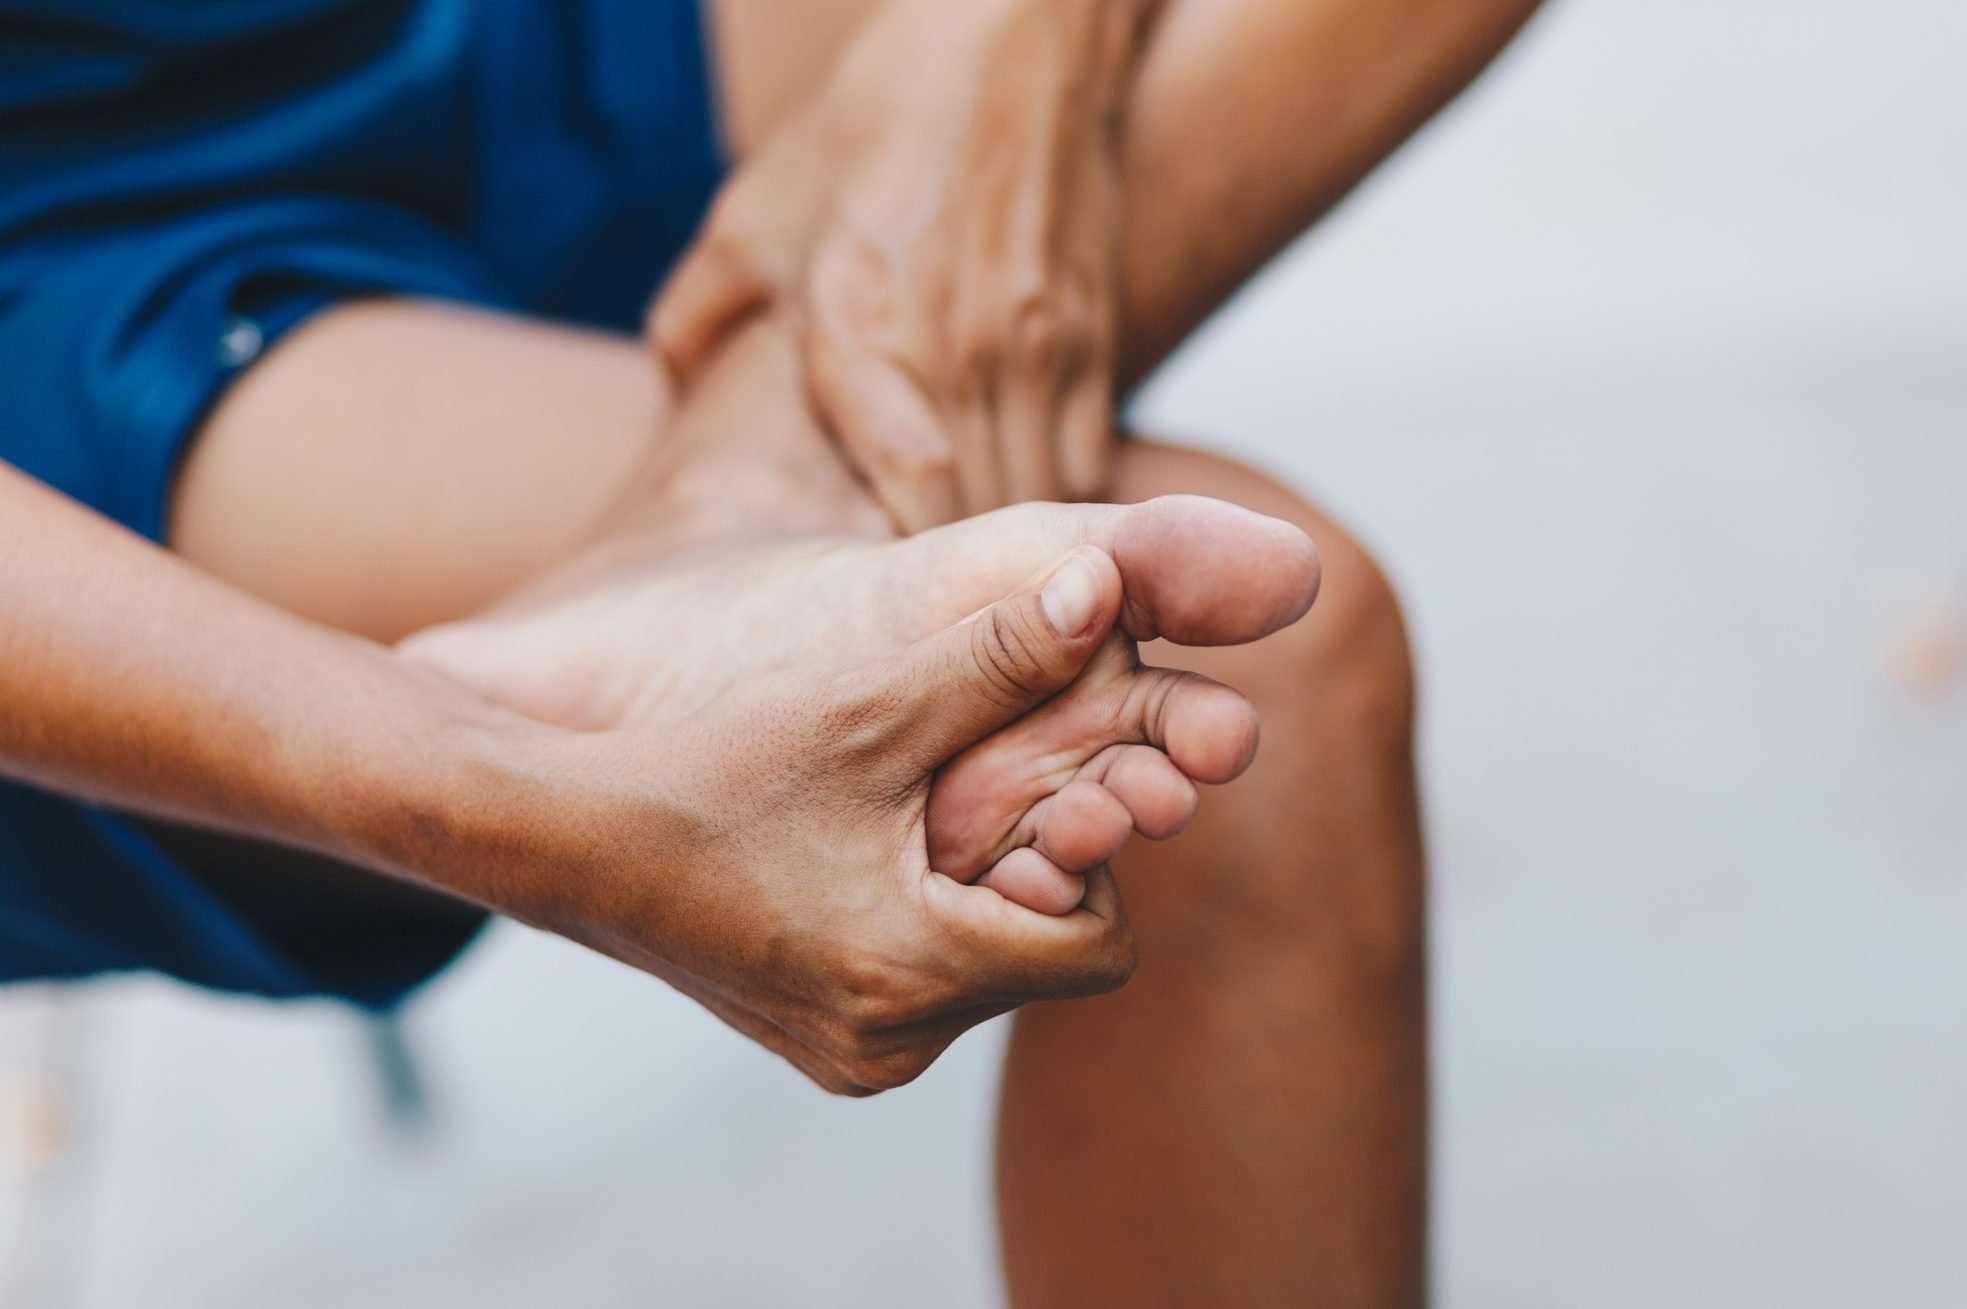 Here's Why You Might Have Pain in the Ball of Your Foot